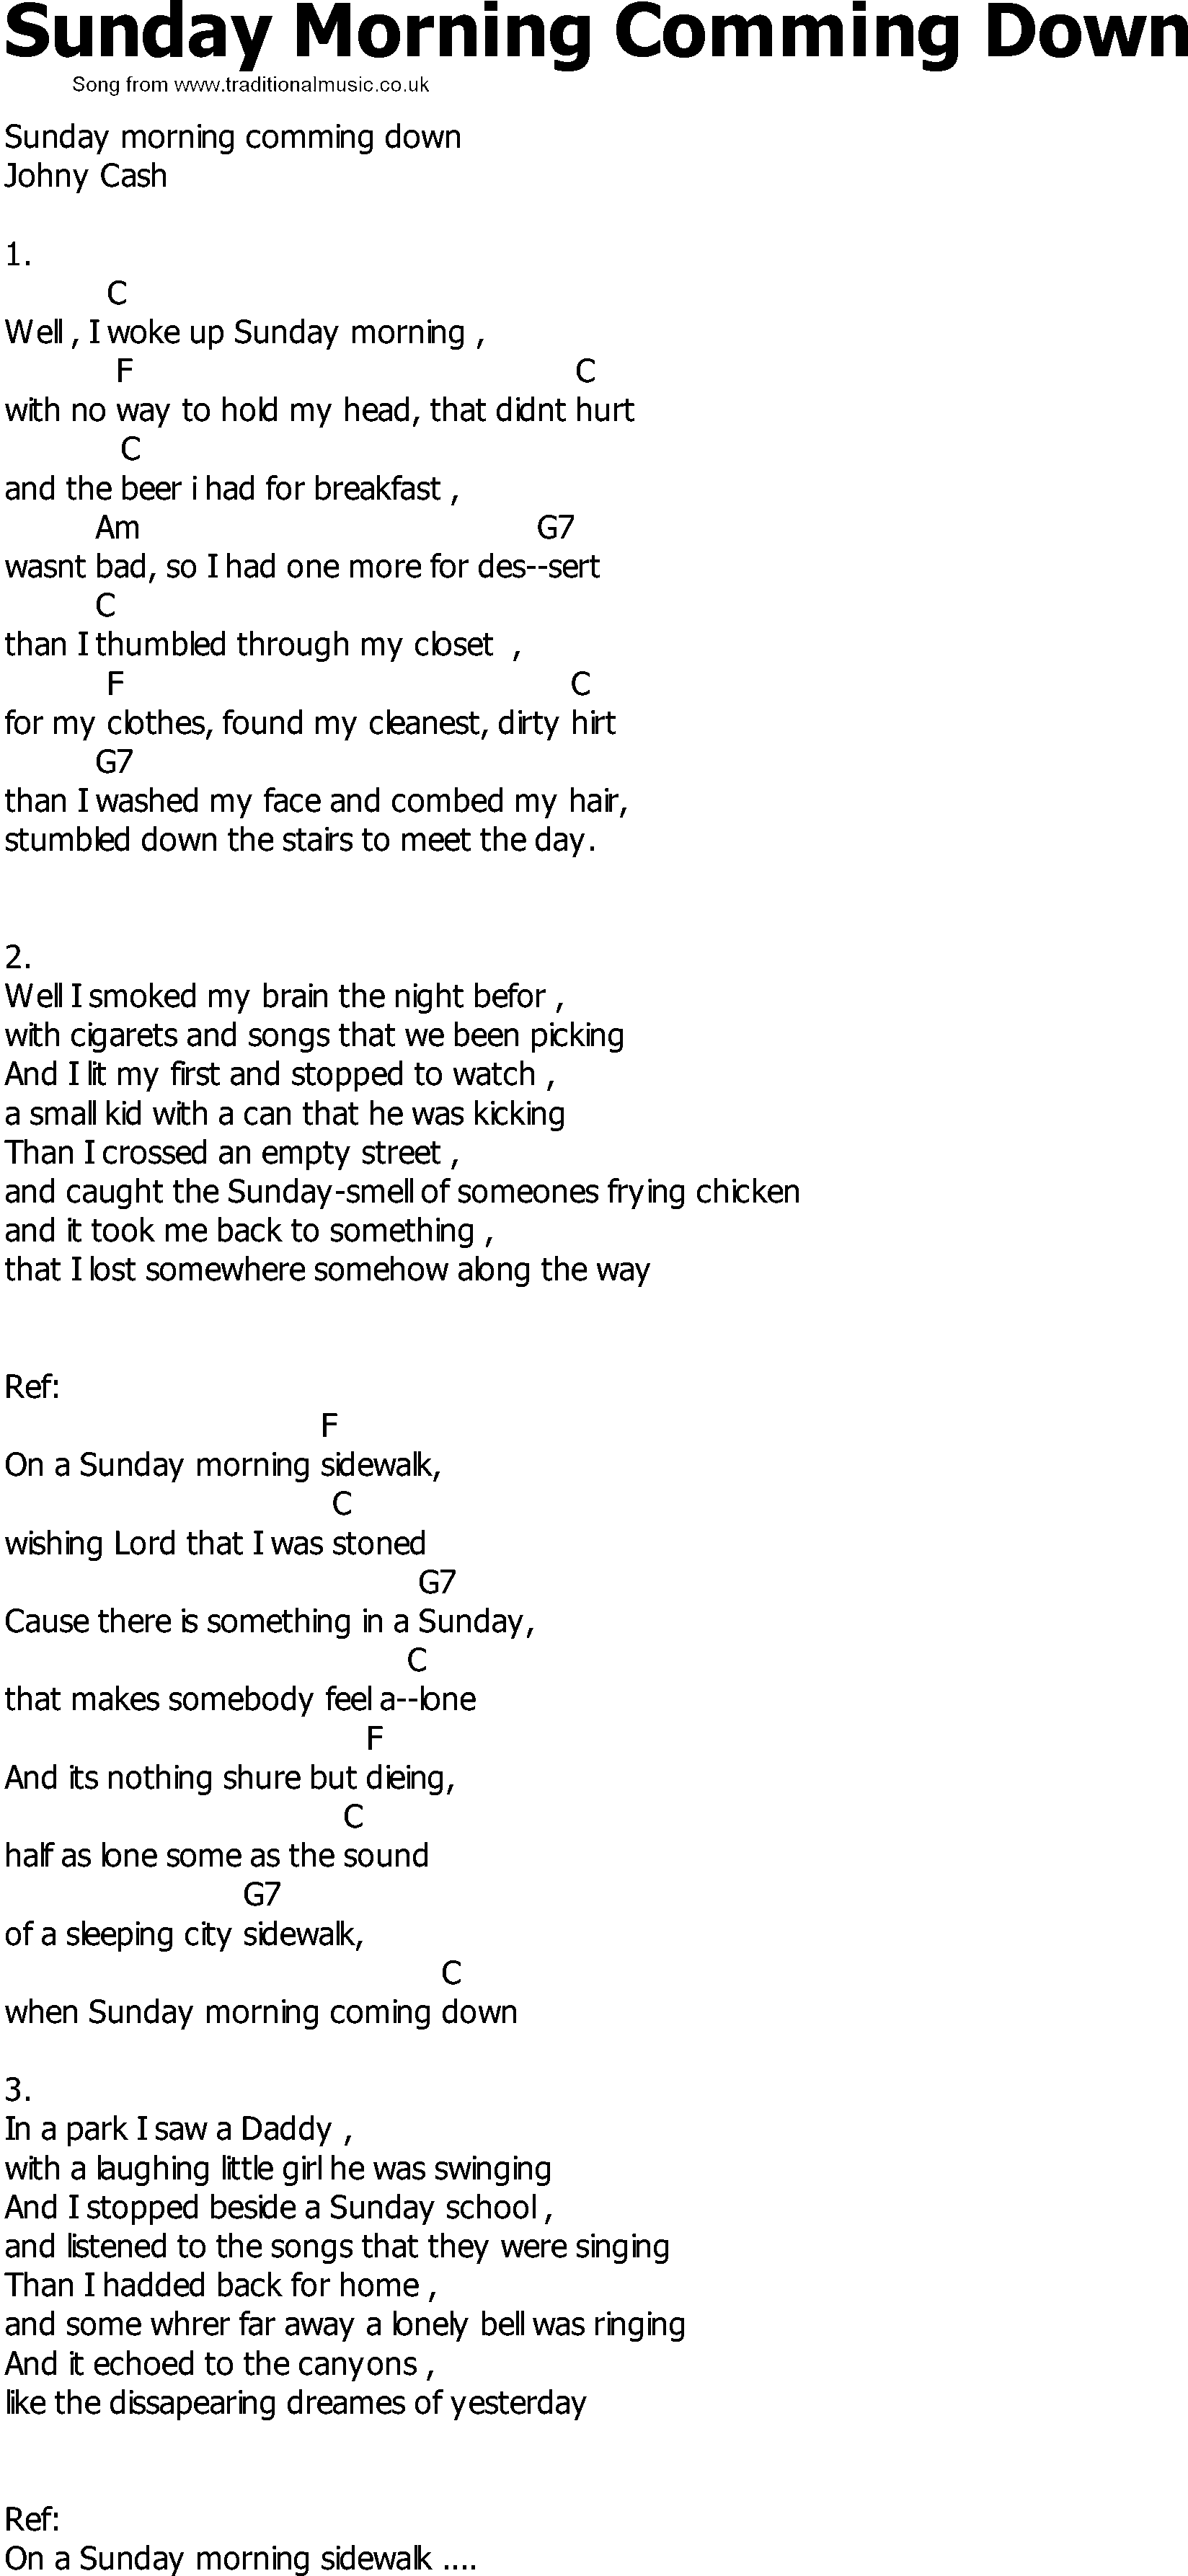 Old Country song lyrics with chords - Sunday Morning Comming Down